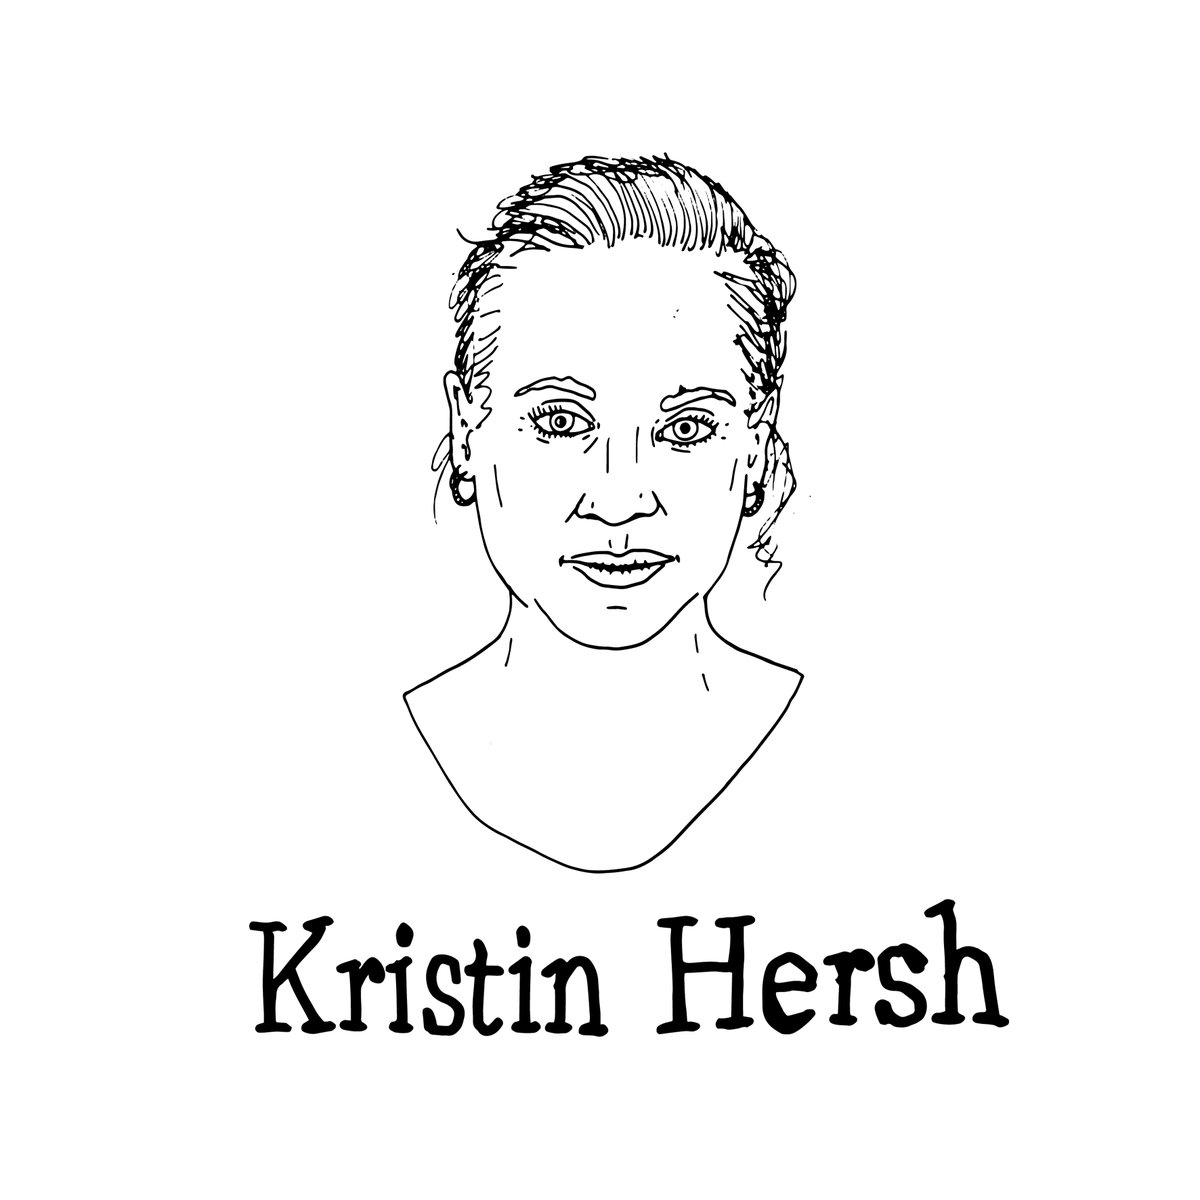 .@kristinhersh is currently touring her latest album ‘Clear Pond Road’ & will be hitting London on Saturday to celebrate our birthday at @EartHackney where she'll be treating us to 2 appearances: a solo set at 7.50PM & then 10PM with ‘The Giant Syndicate’.